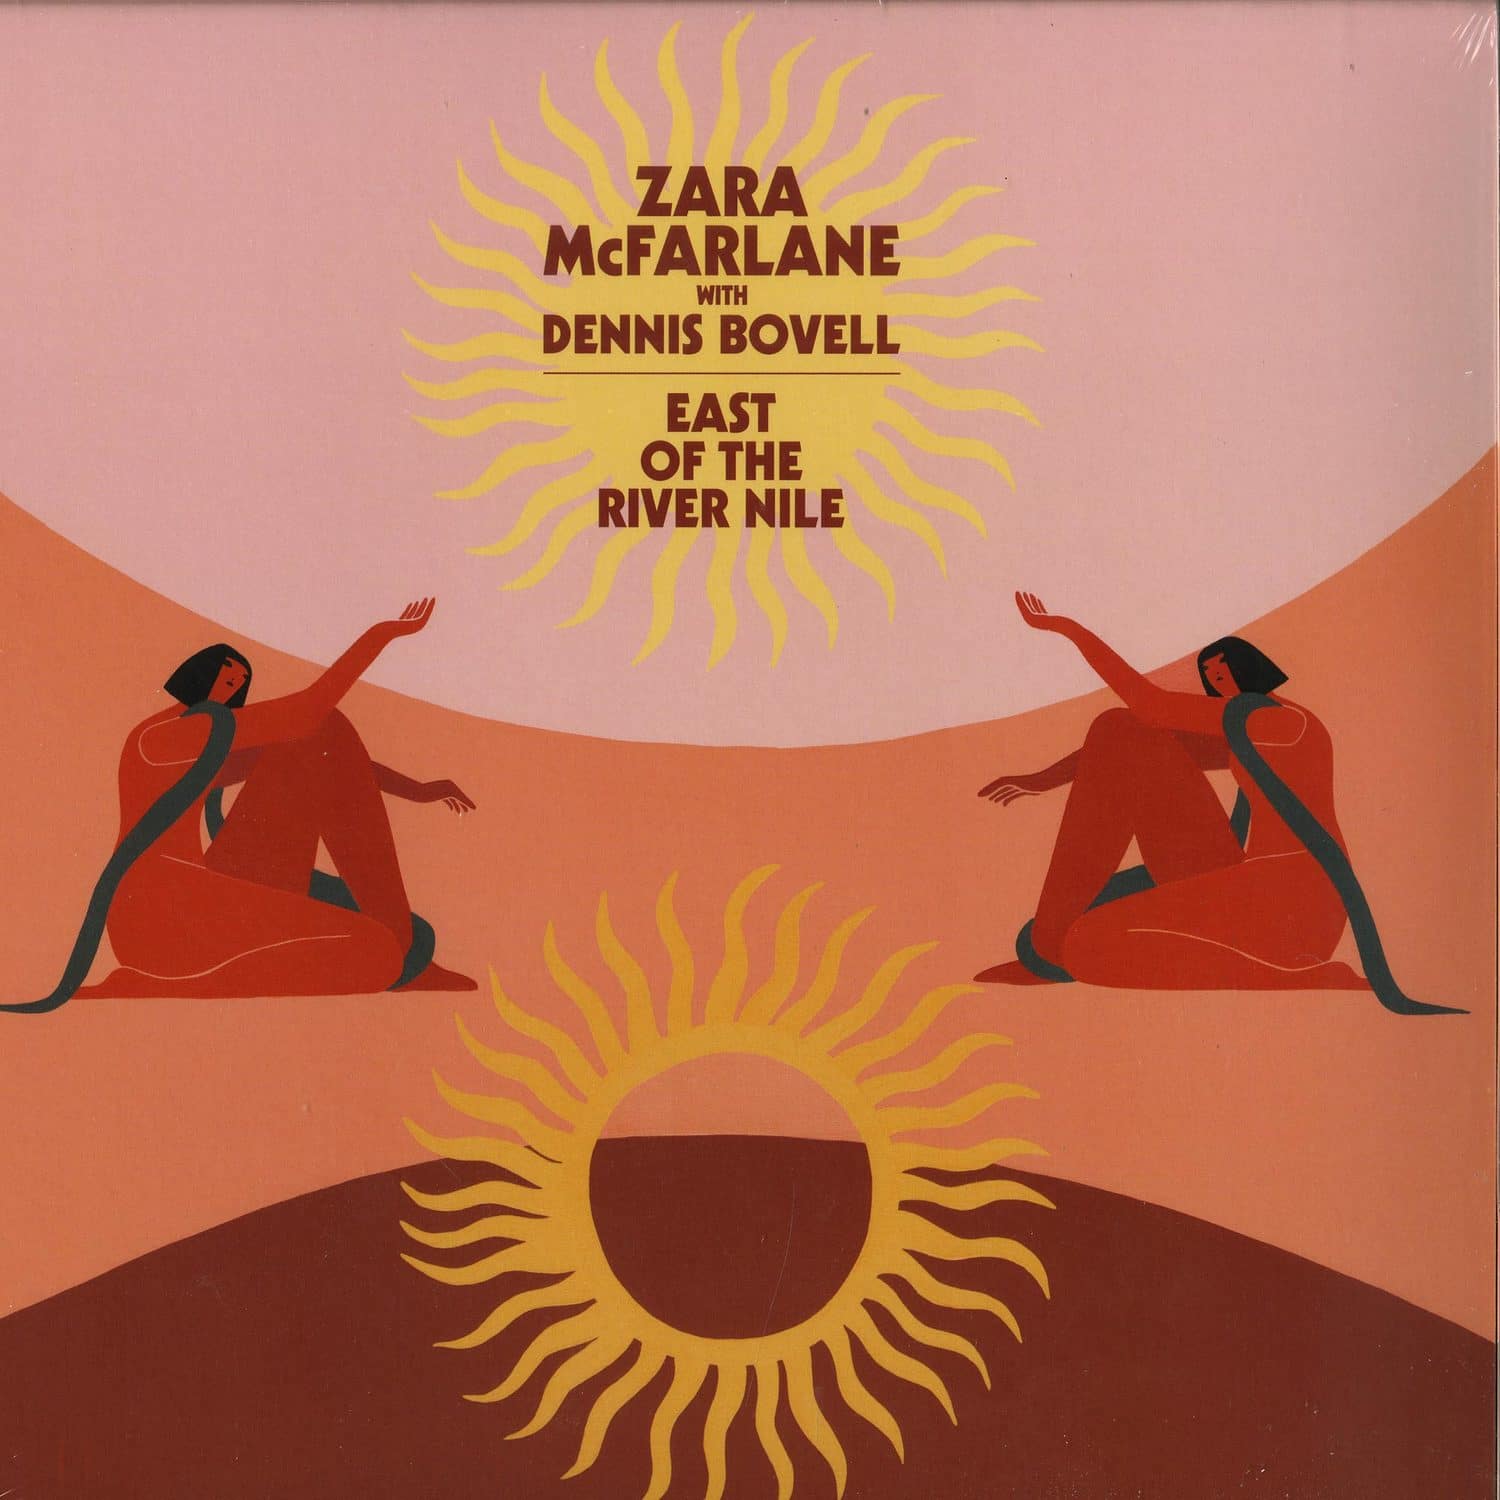 Zara Mcfarlane with Dennis Bovell - EAST OF THE RIVER NILE